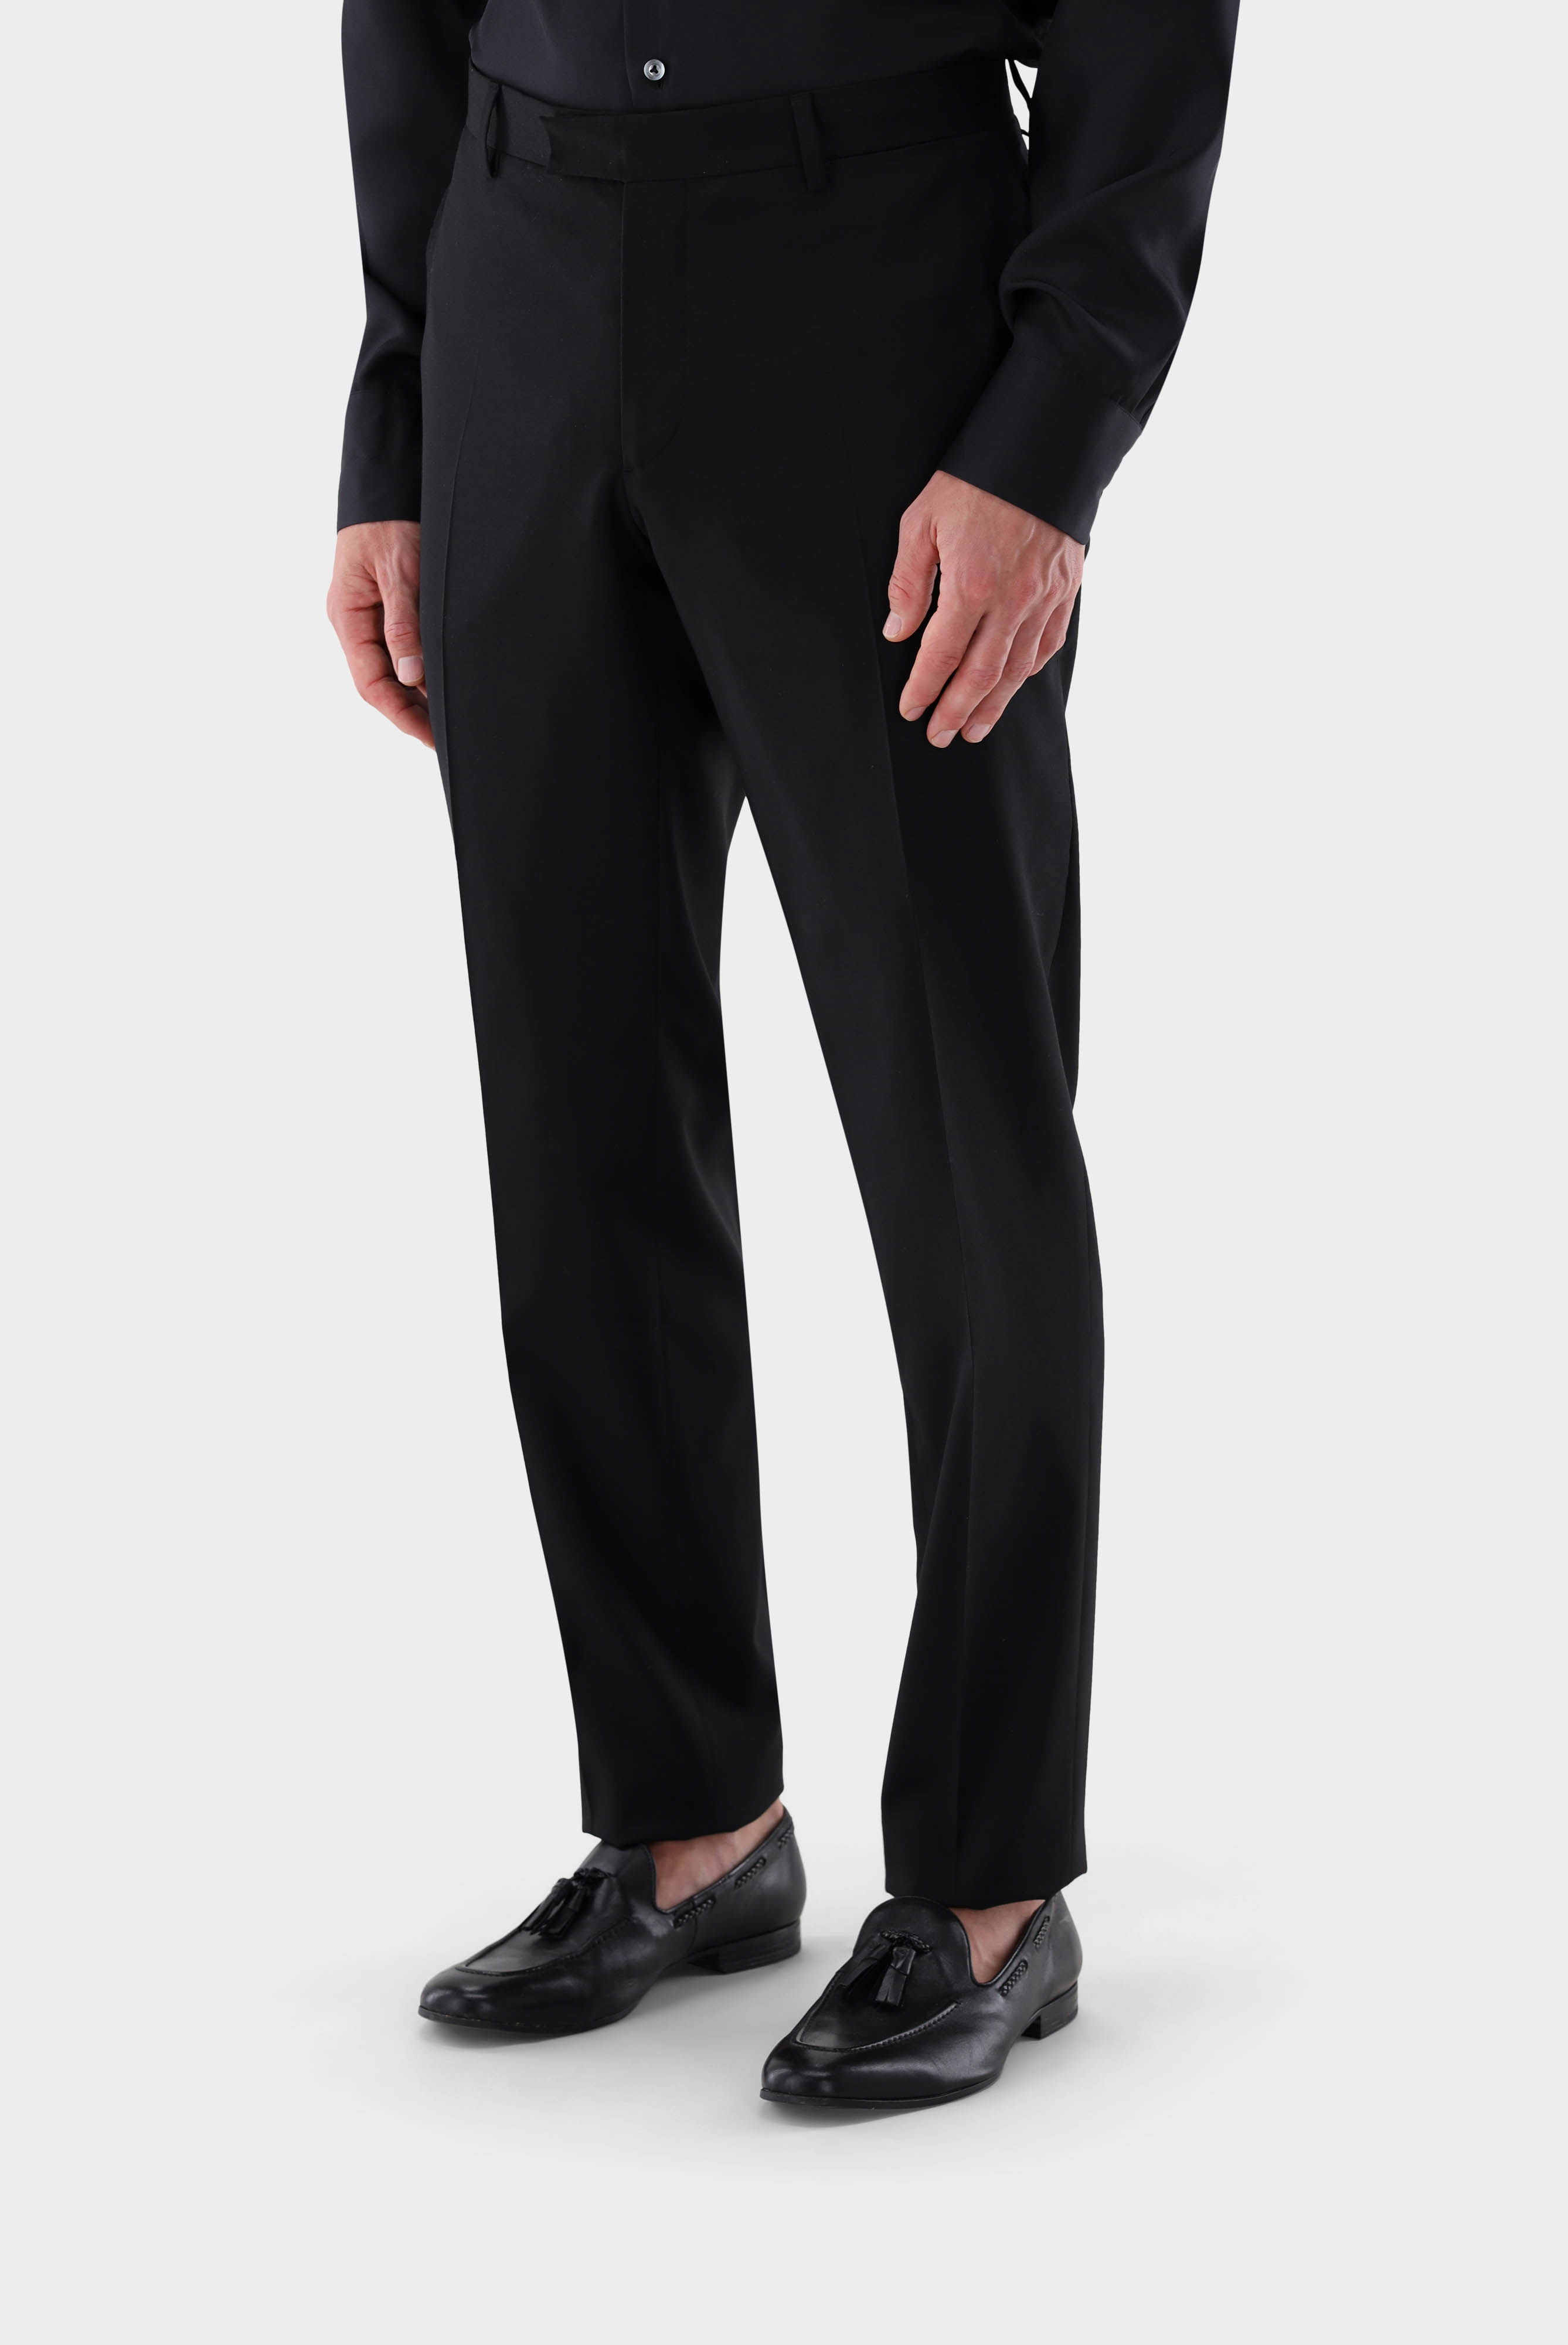 Jeans & Trousers+Wool Trousers Slim Fit+20.7880.16.H01010.099.46